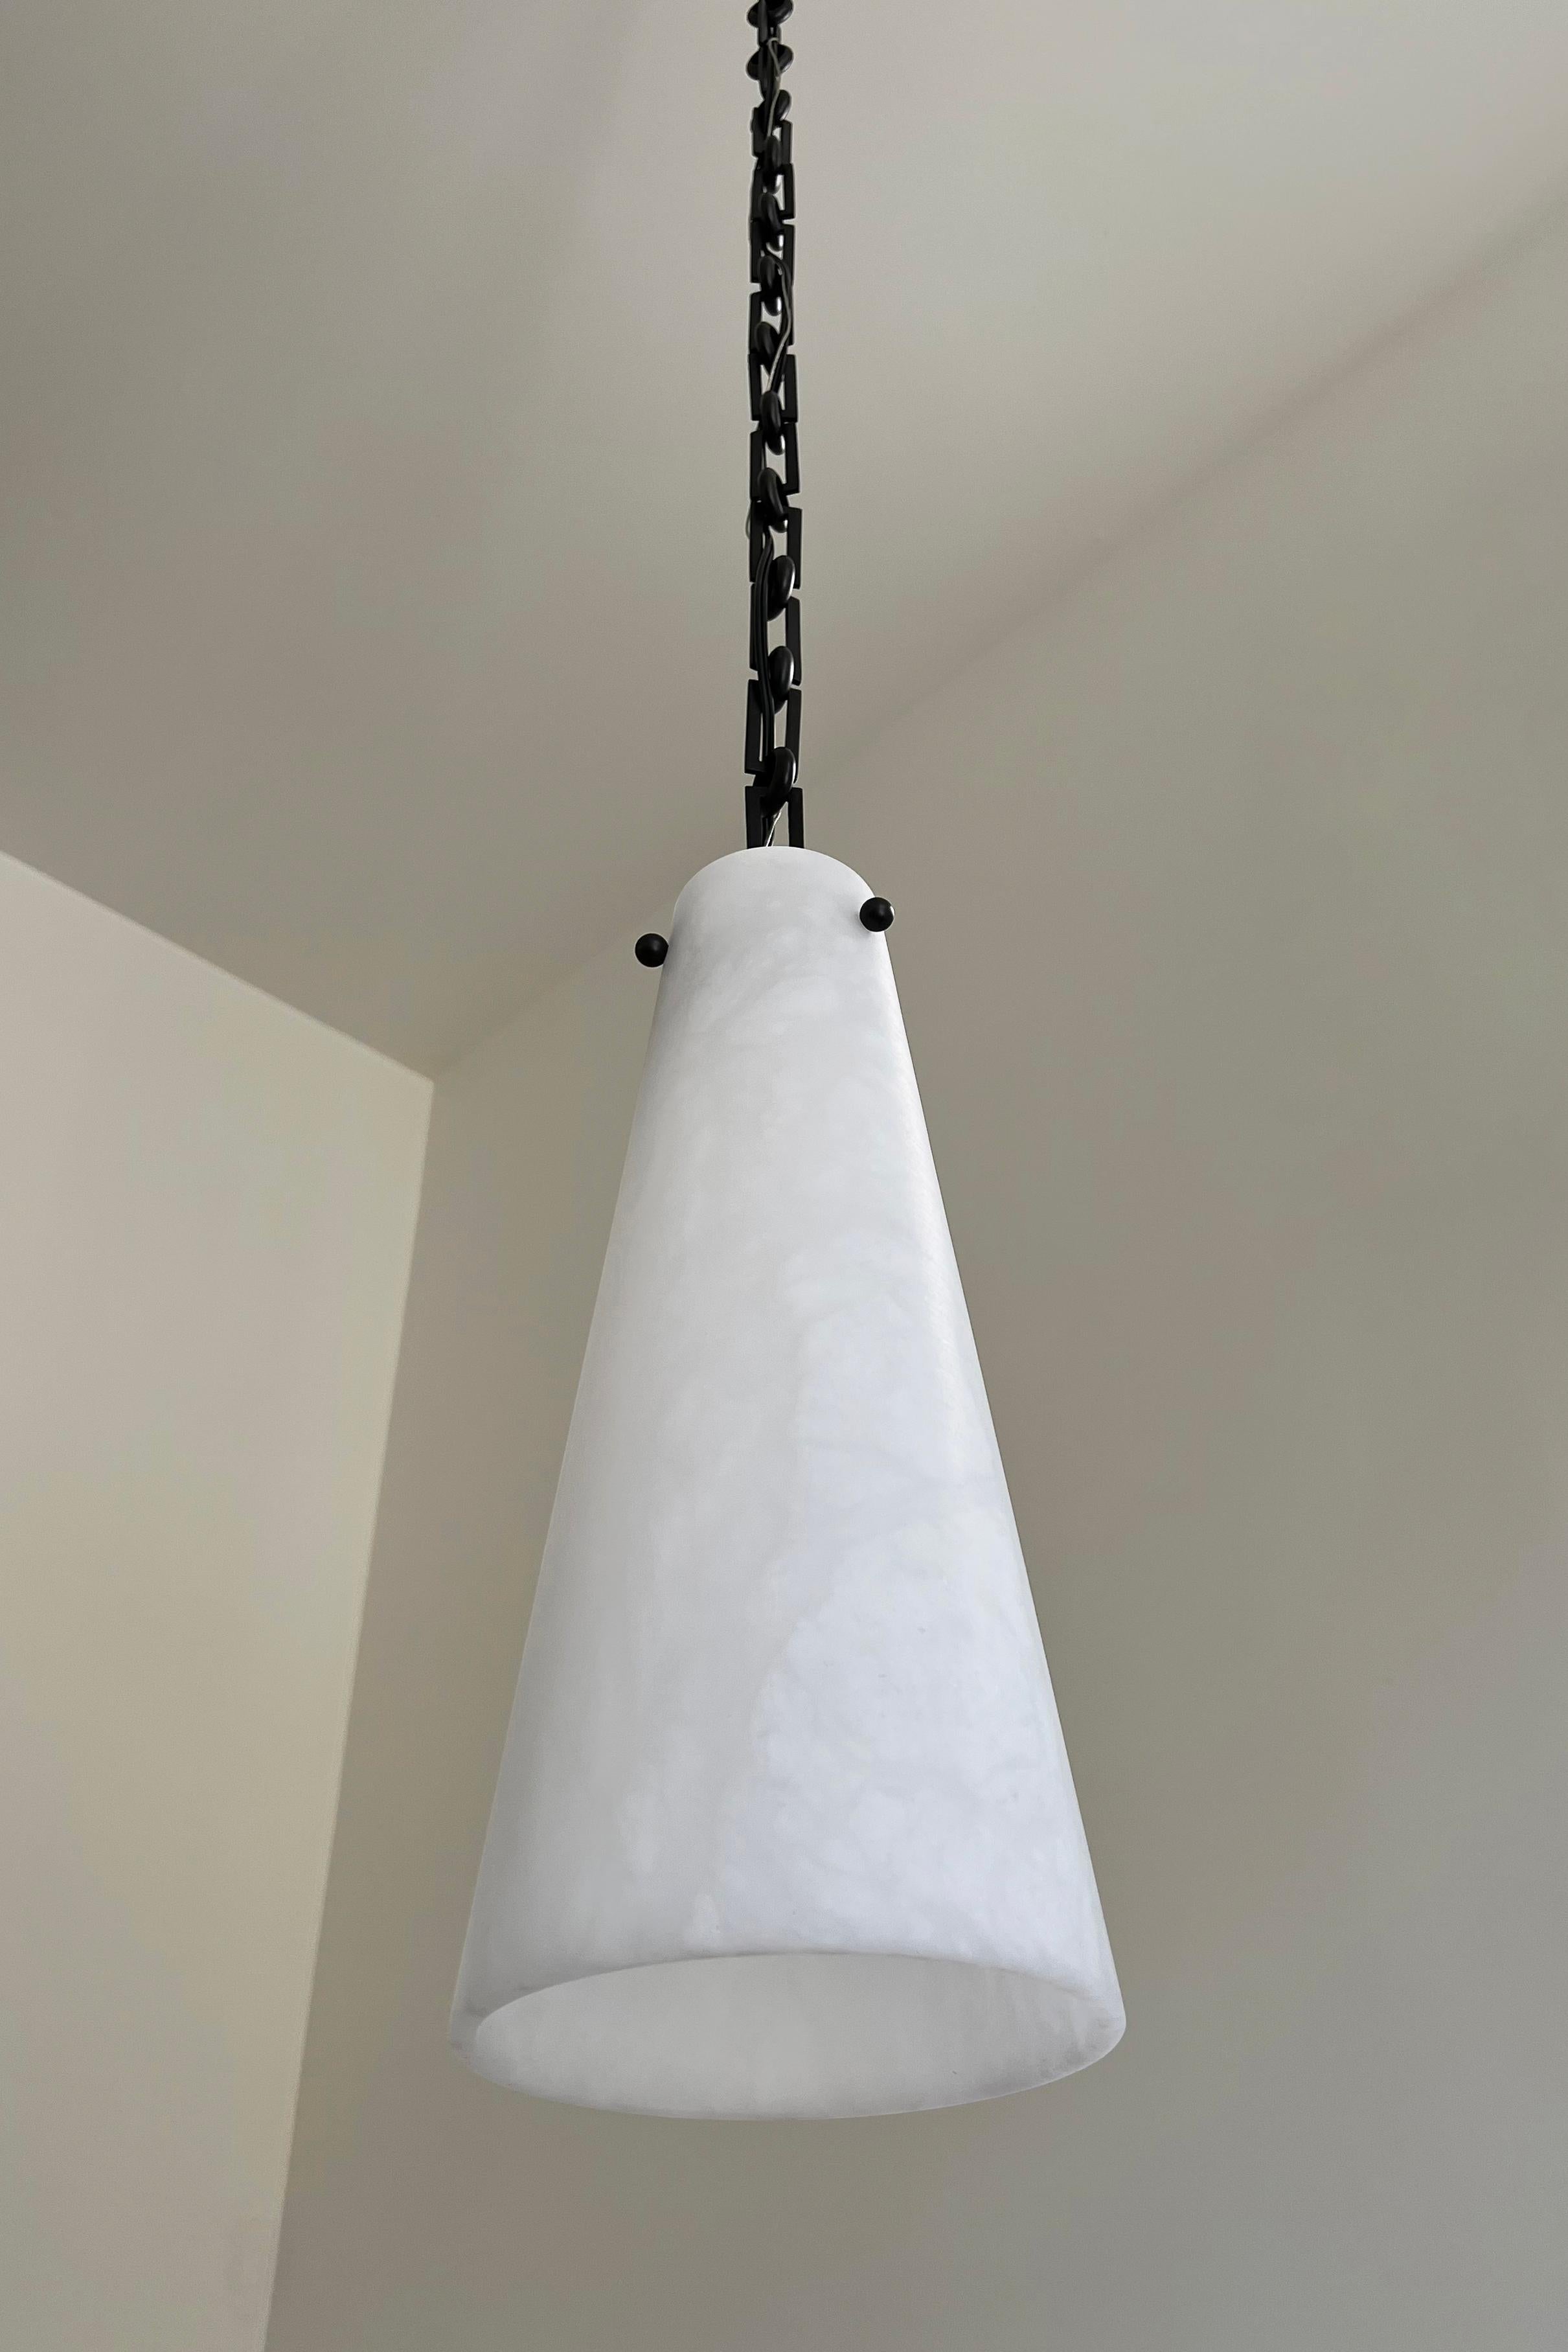 Blackened Contemporary Lucca Double Pendant 202A-1S in Alabaster by Orphan Work, 2021 For Sale